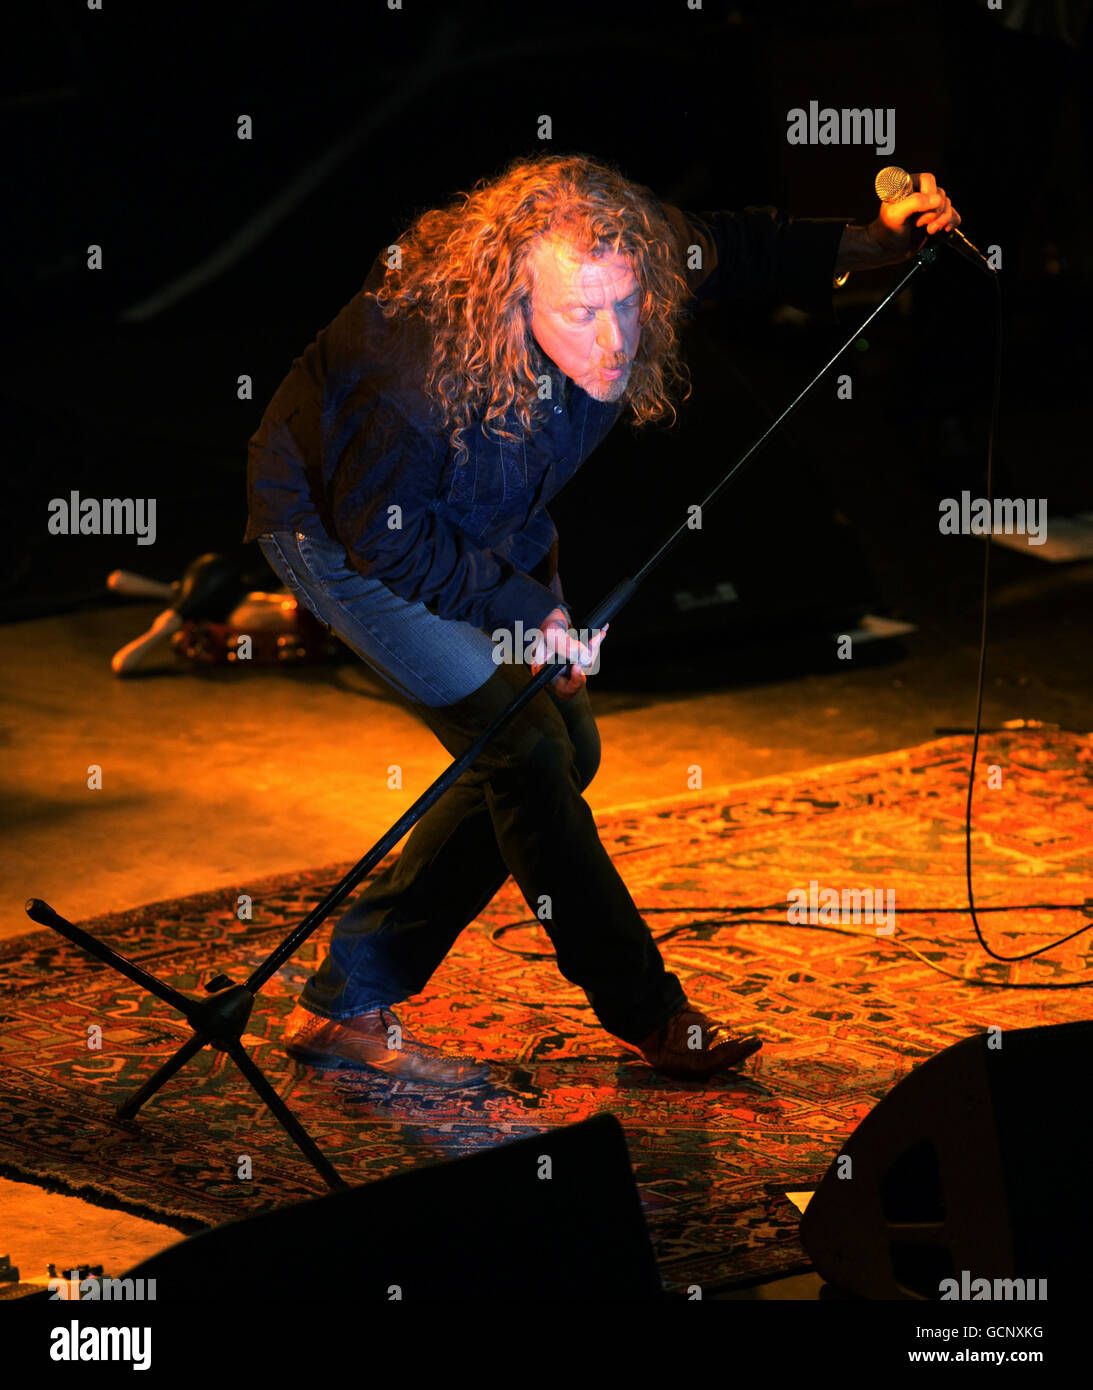 . Robert Plant and the Band of Joy perform at The Forum in Highgate, north London. PRESS ASSOCIATION Photo. Picture date: Thursday September 2, 2010. Photo credit should read: Yui Mok/PA Wire Stock Photo